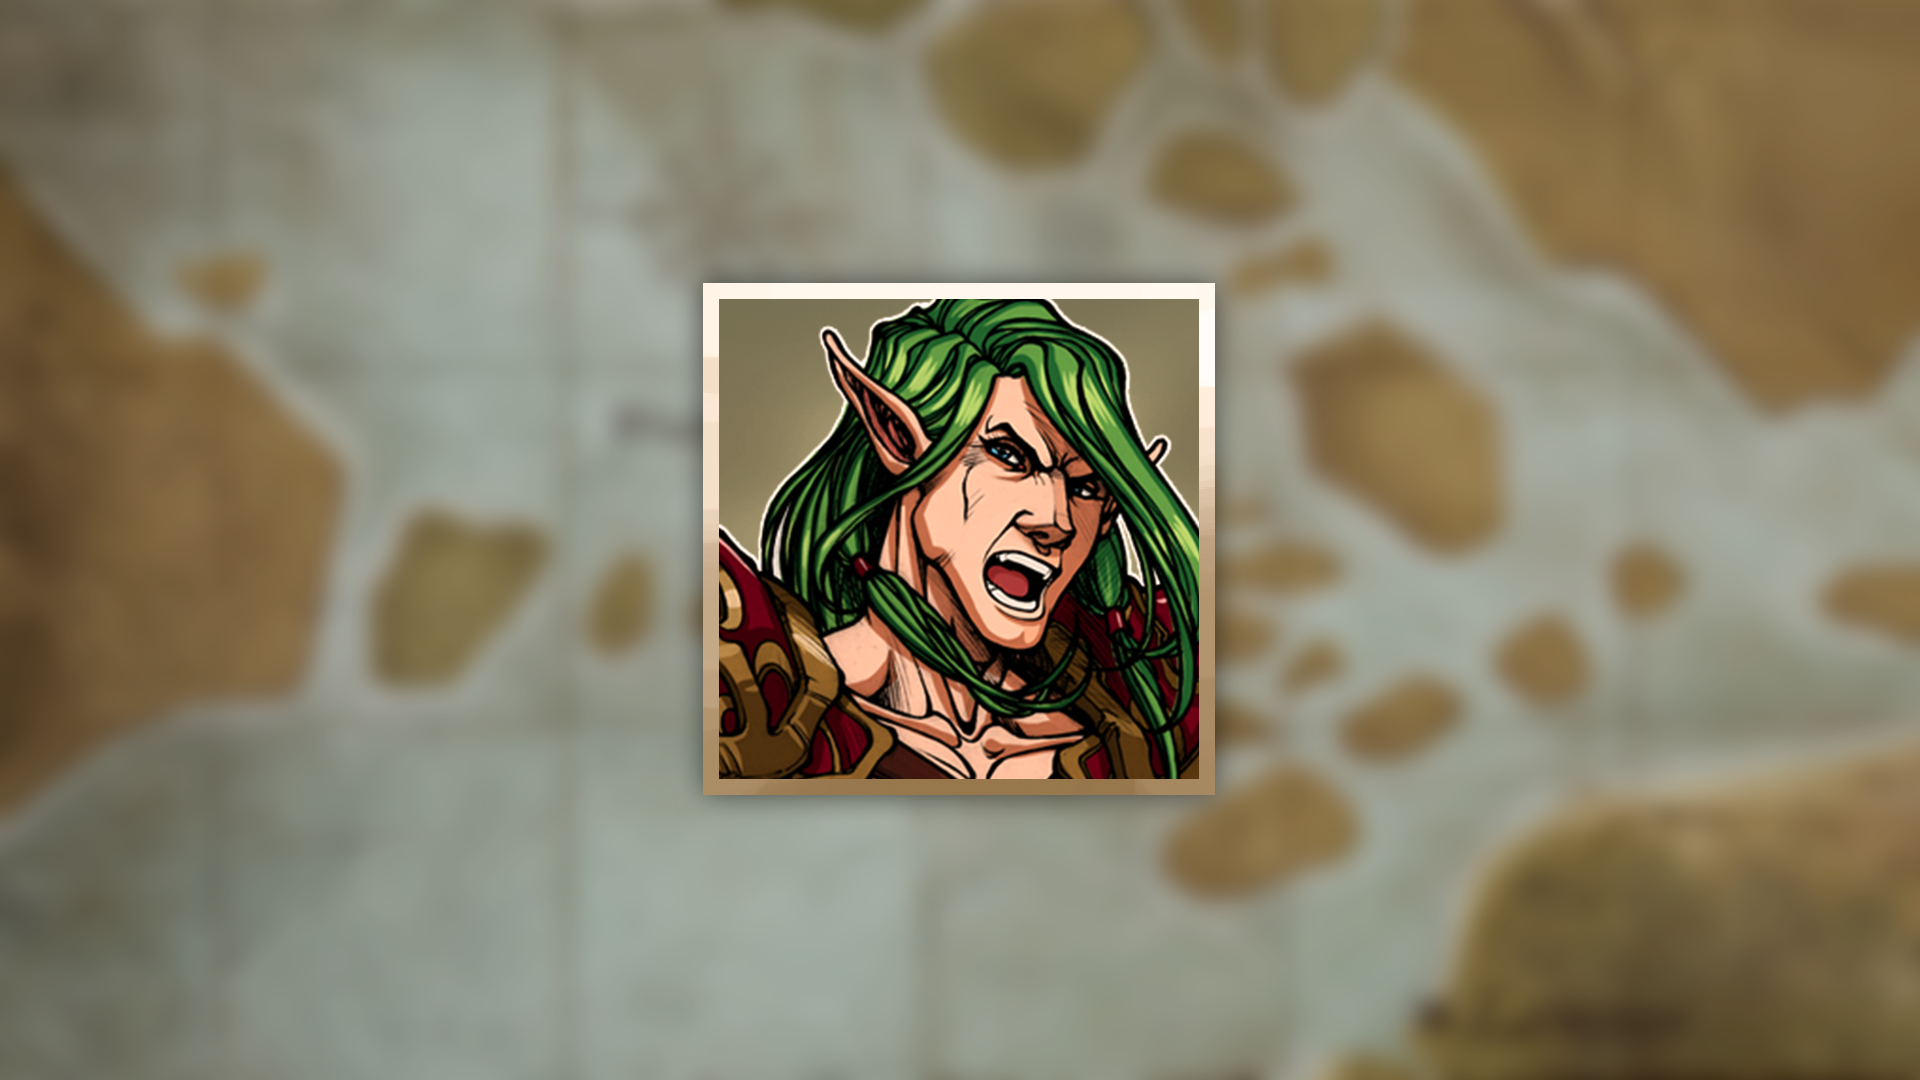 Icon for Banished